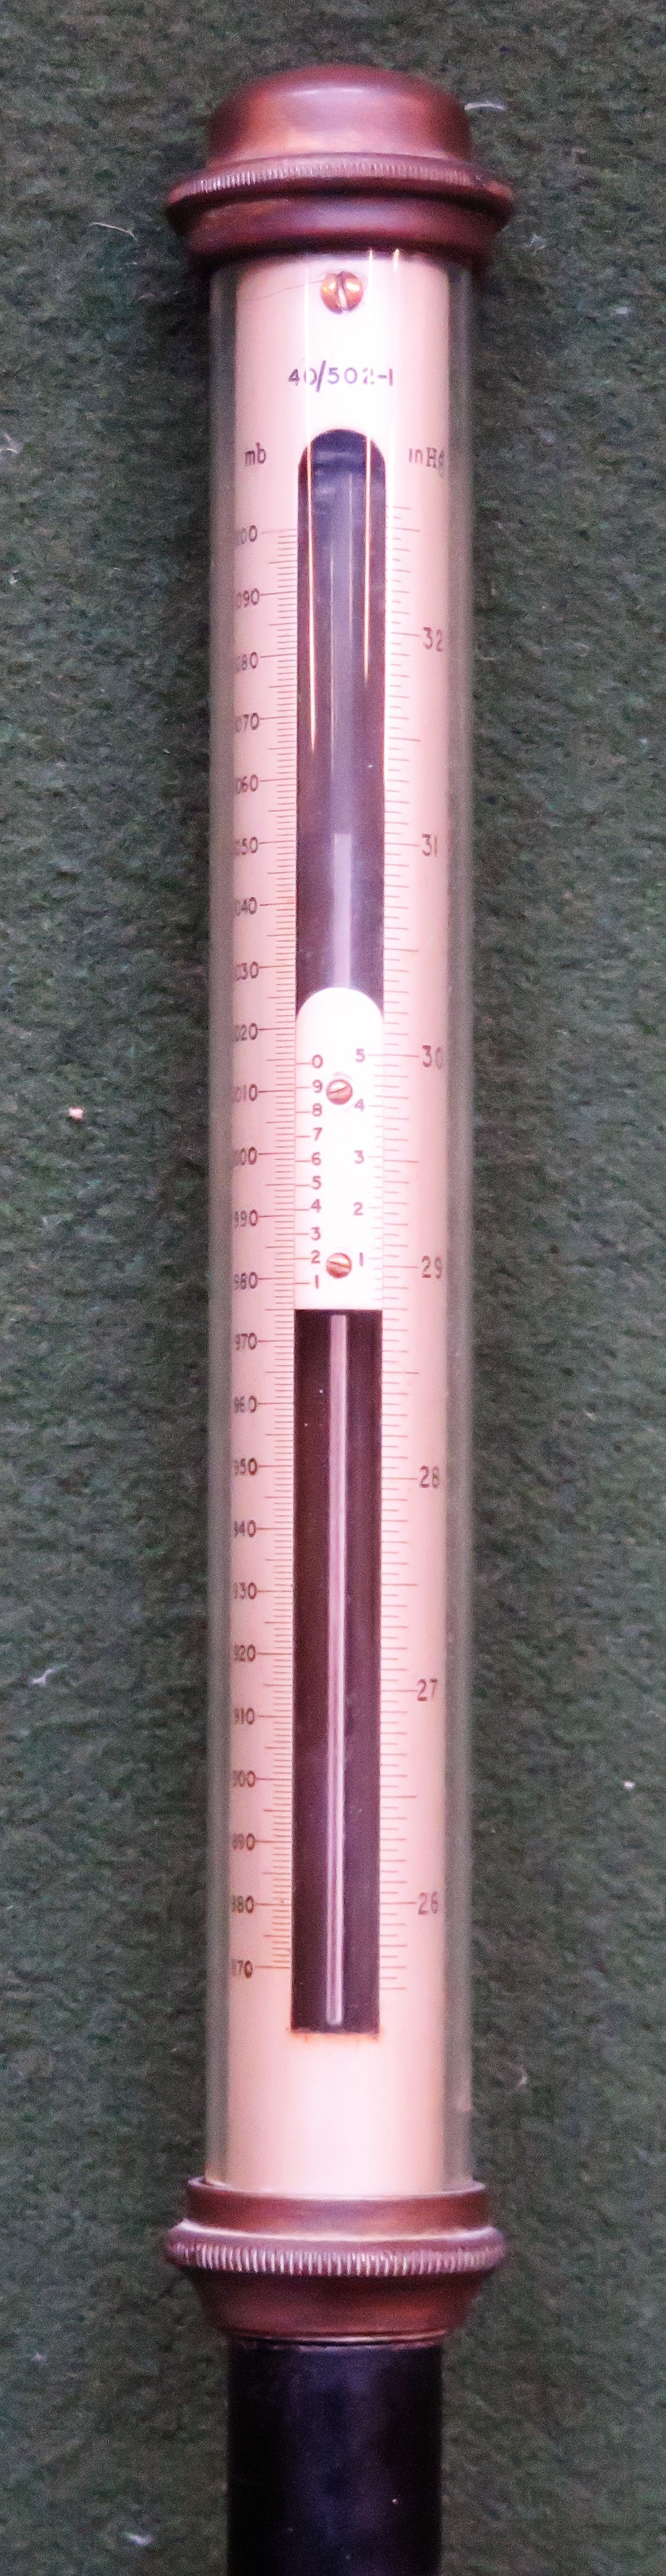 Early 20th century Chadburns stick barometer. Approx. 93cm H, Plus Harrisons of Liverpool hardback - Image 4 of 4